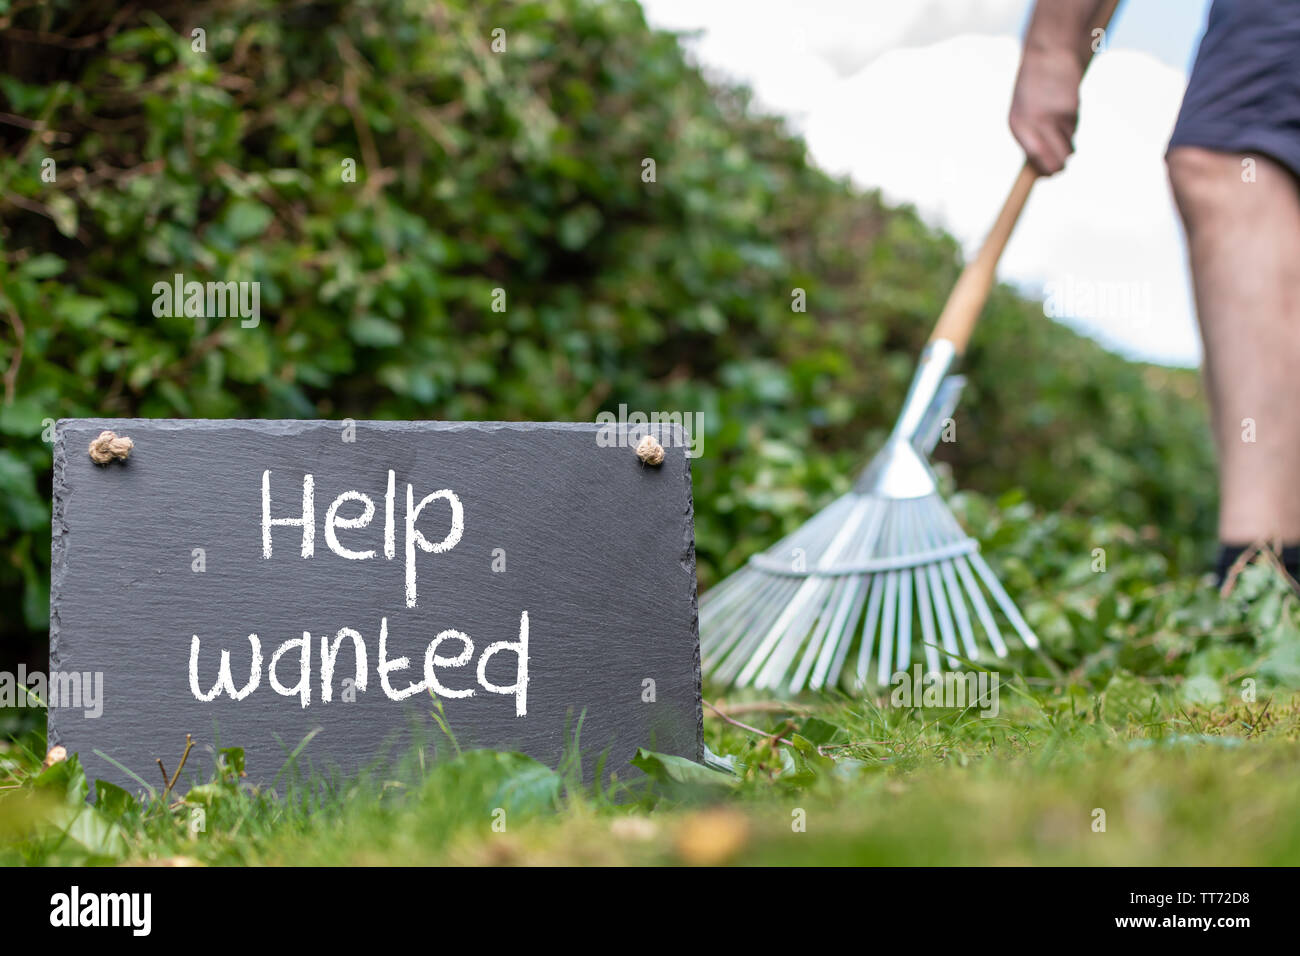 Help wanted in the garden. Man is raking leaves of a freshly cut hornbeam hedge. The words 'help wanted' are written on a slate. Stock Photo